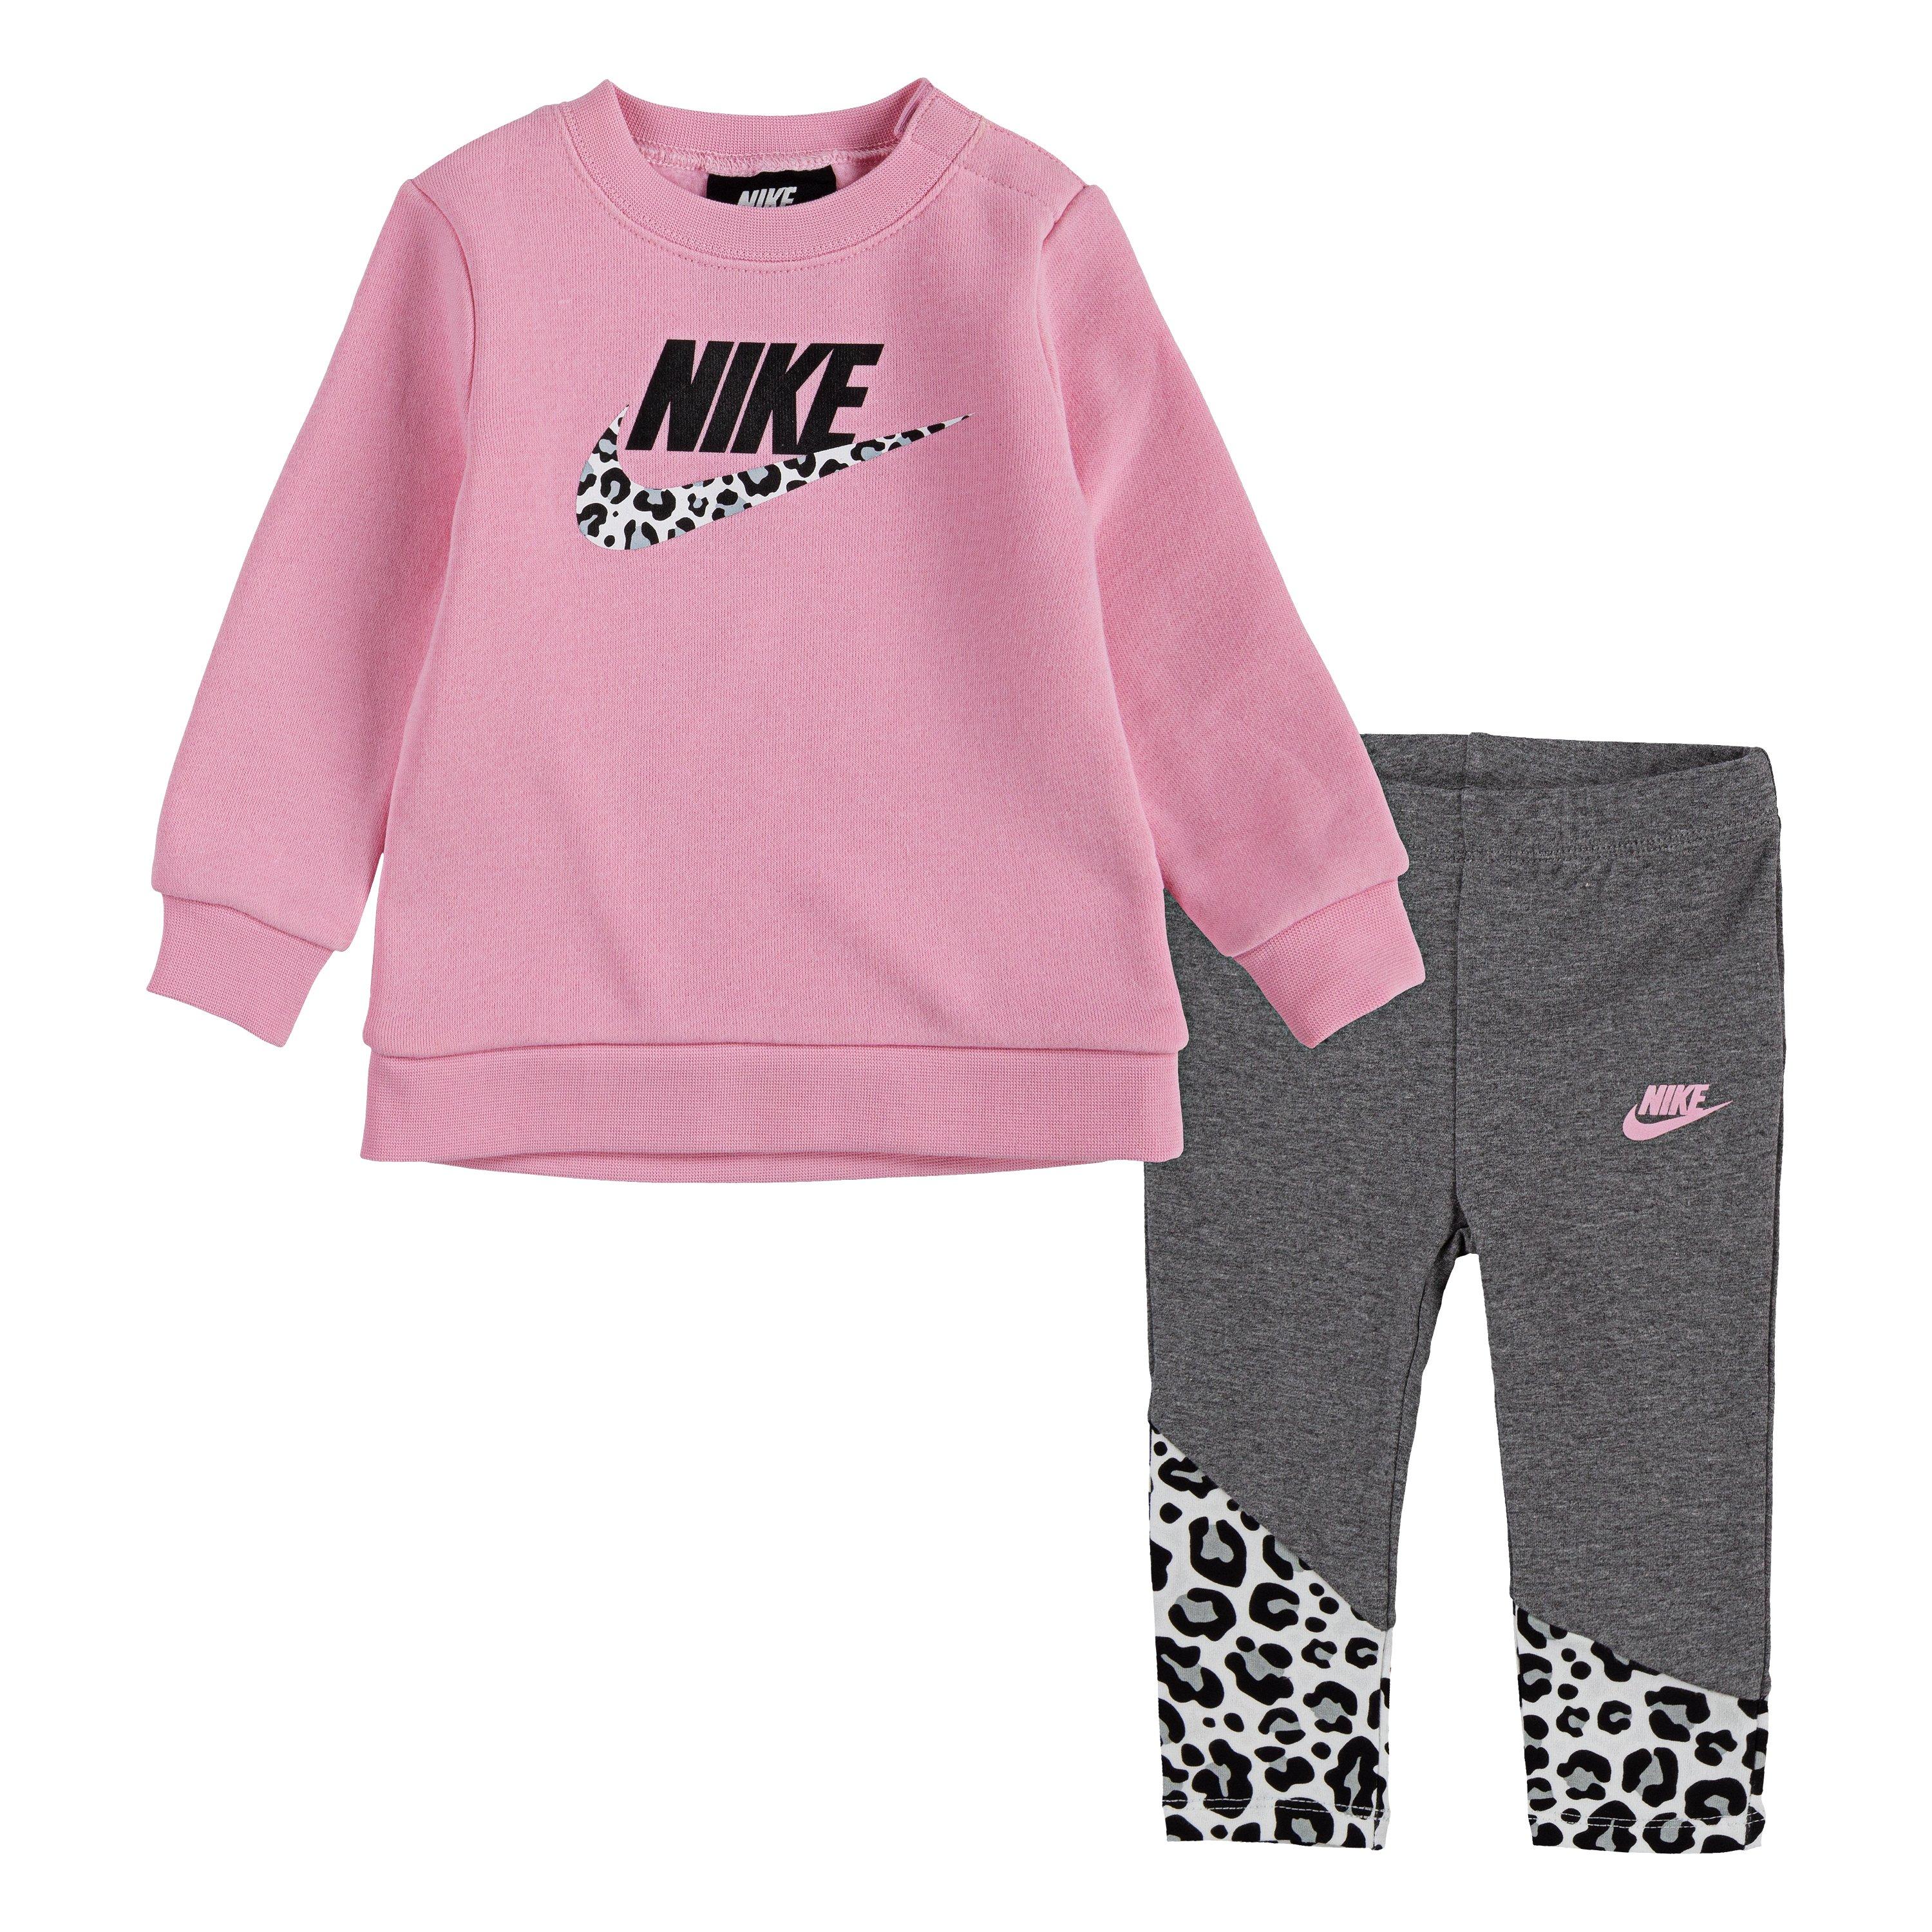 nike youth outfits